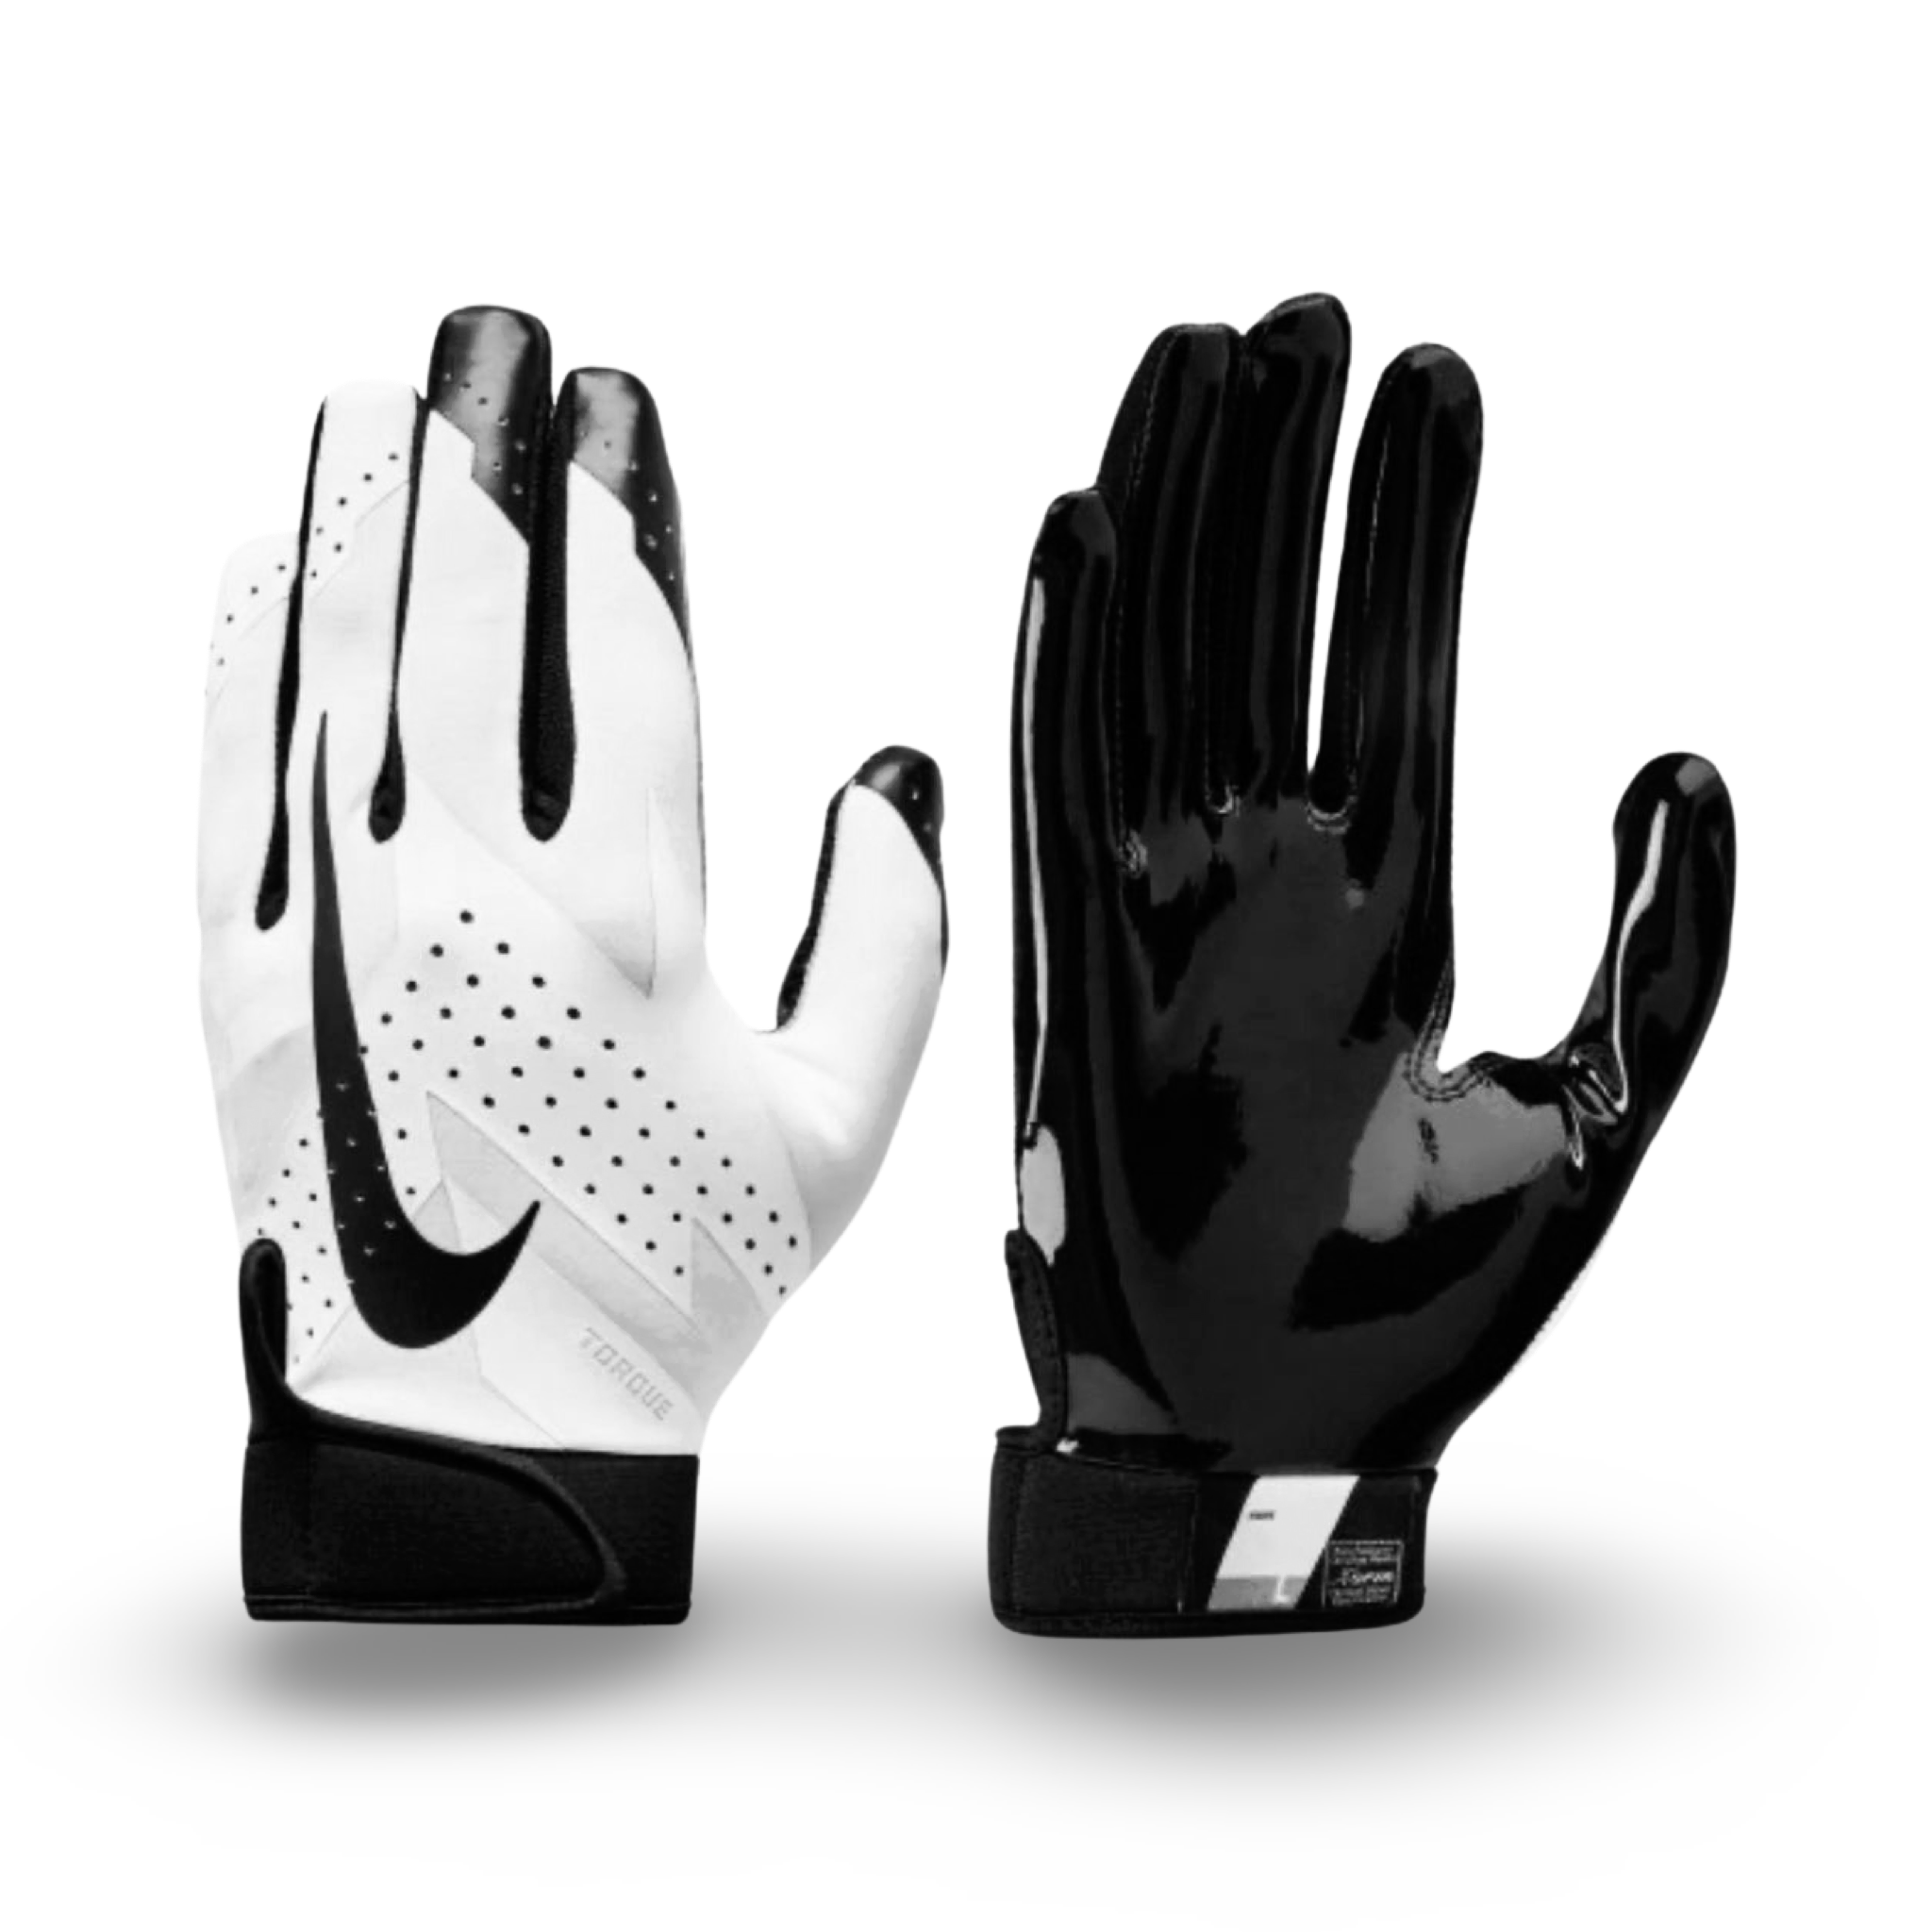 Nike Torque 2.0 Football Gloves - Youth